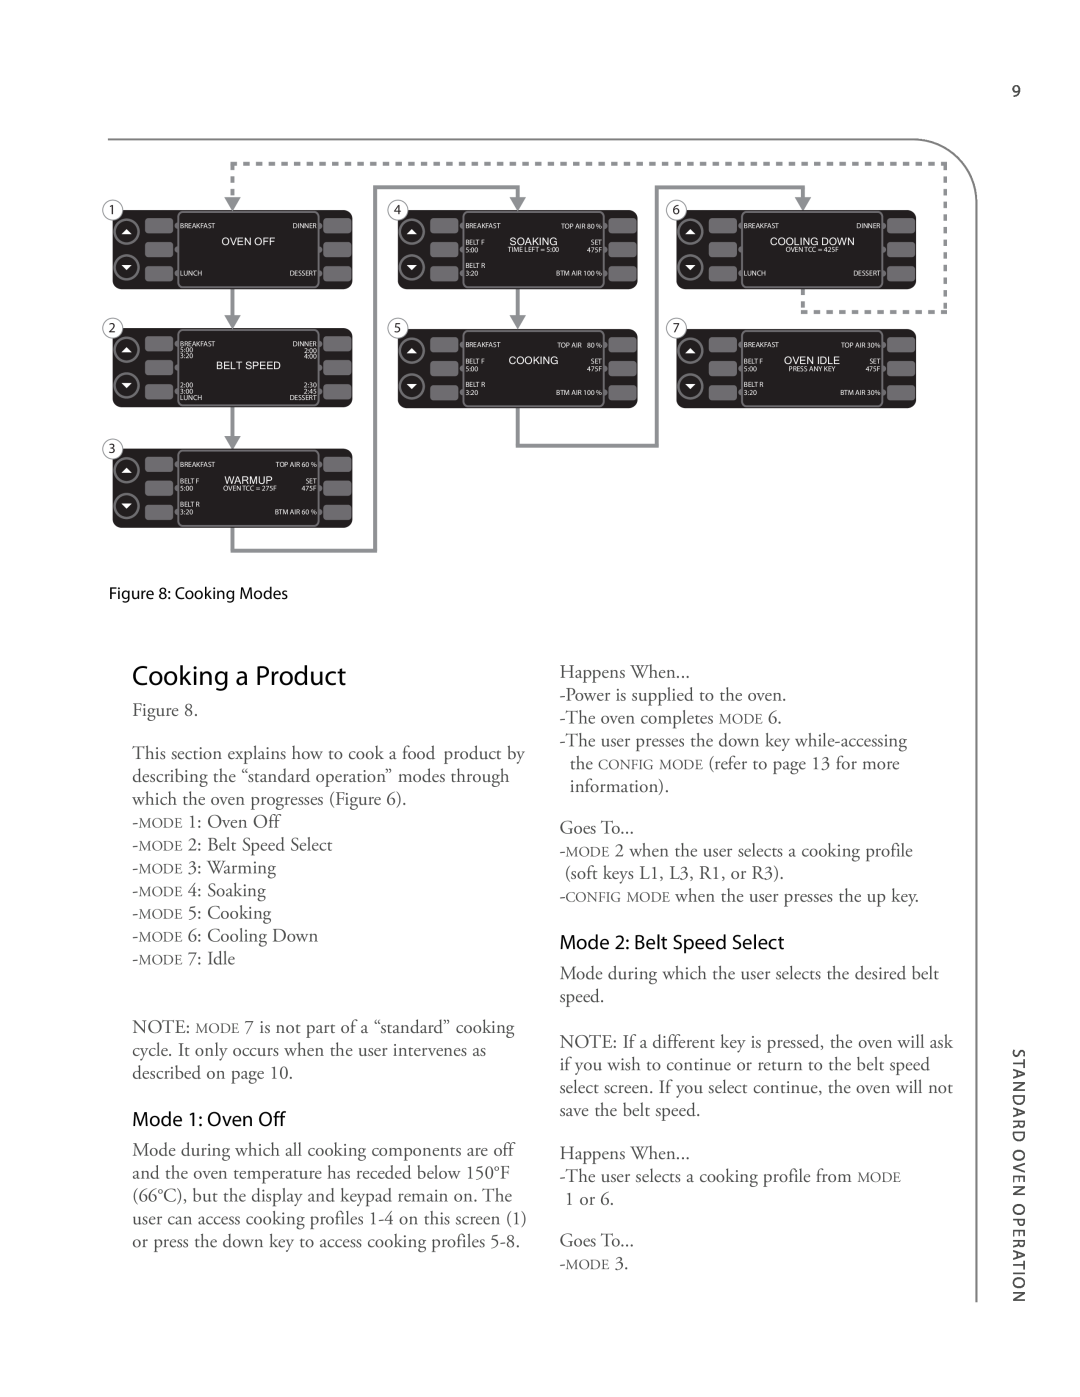 Turbo Chef Technologies 2020 HIGH h manual Cooking a Product, Mode 1 Oven Off, Mode 2 Belt Speed Select 